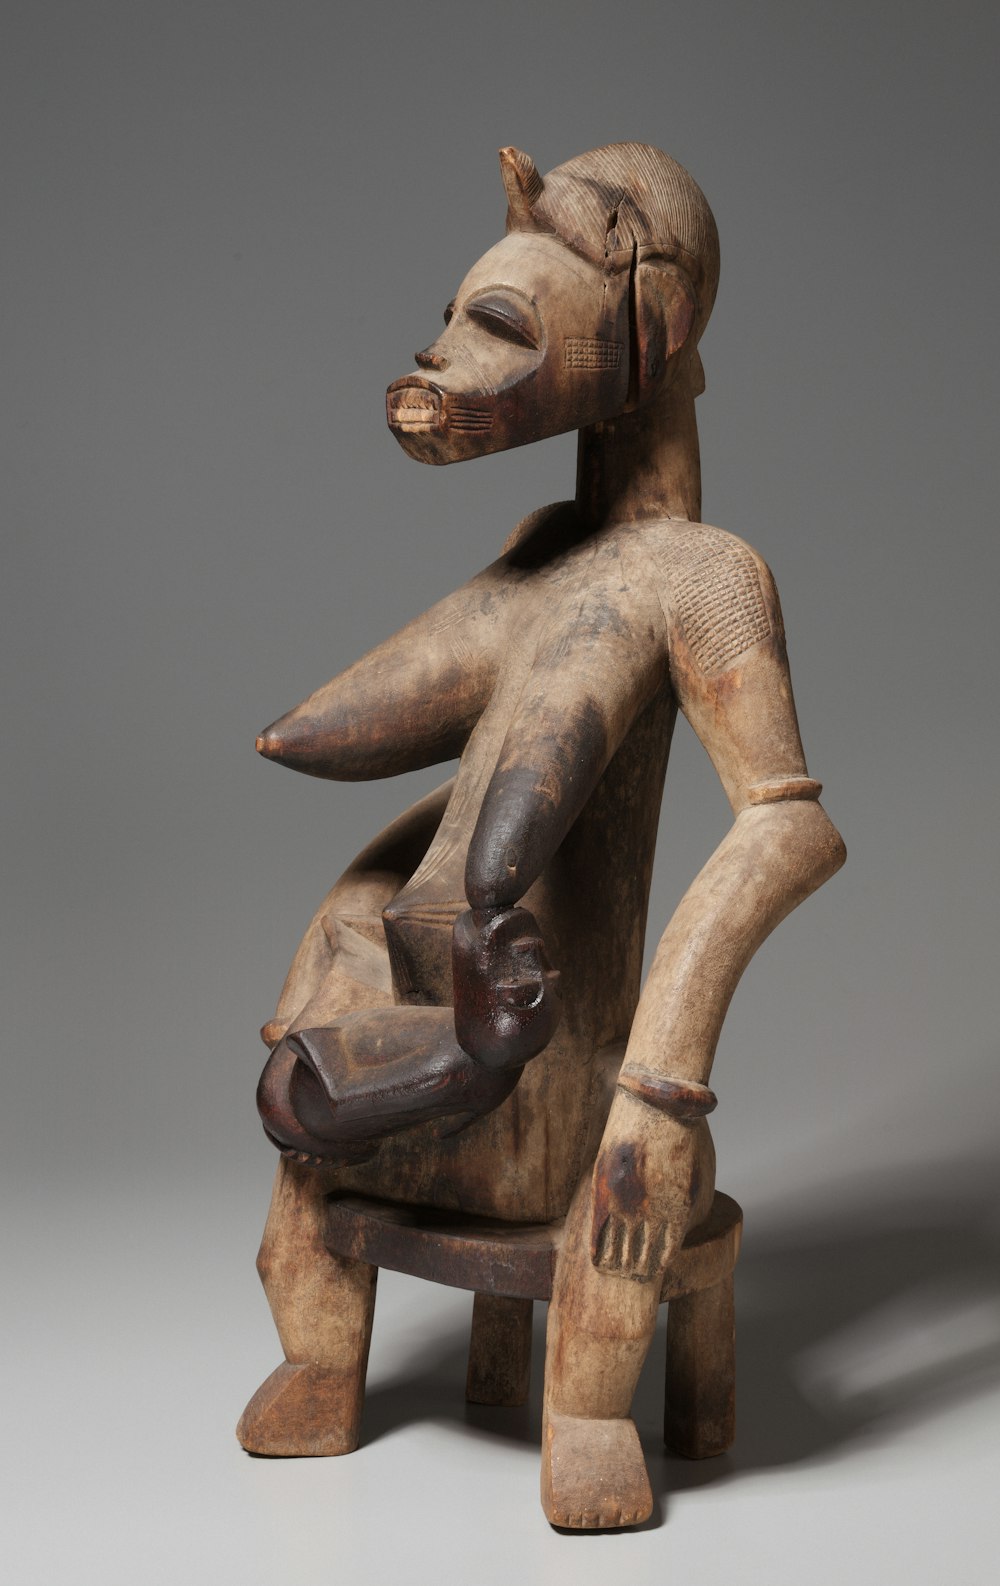 a wooden statue of a person sitting on a chair